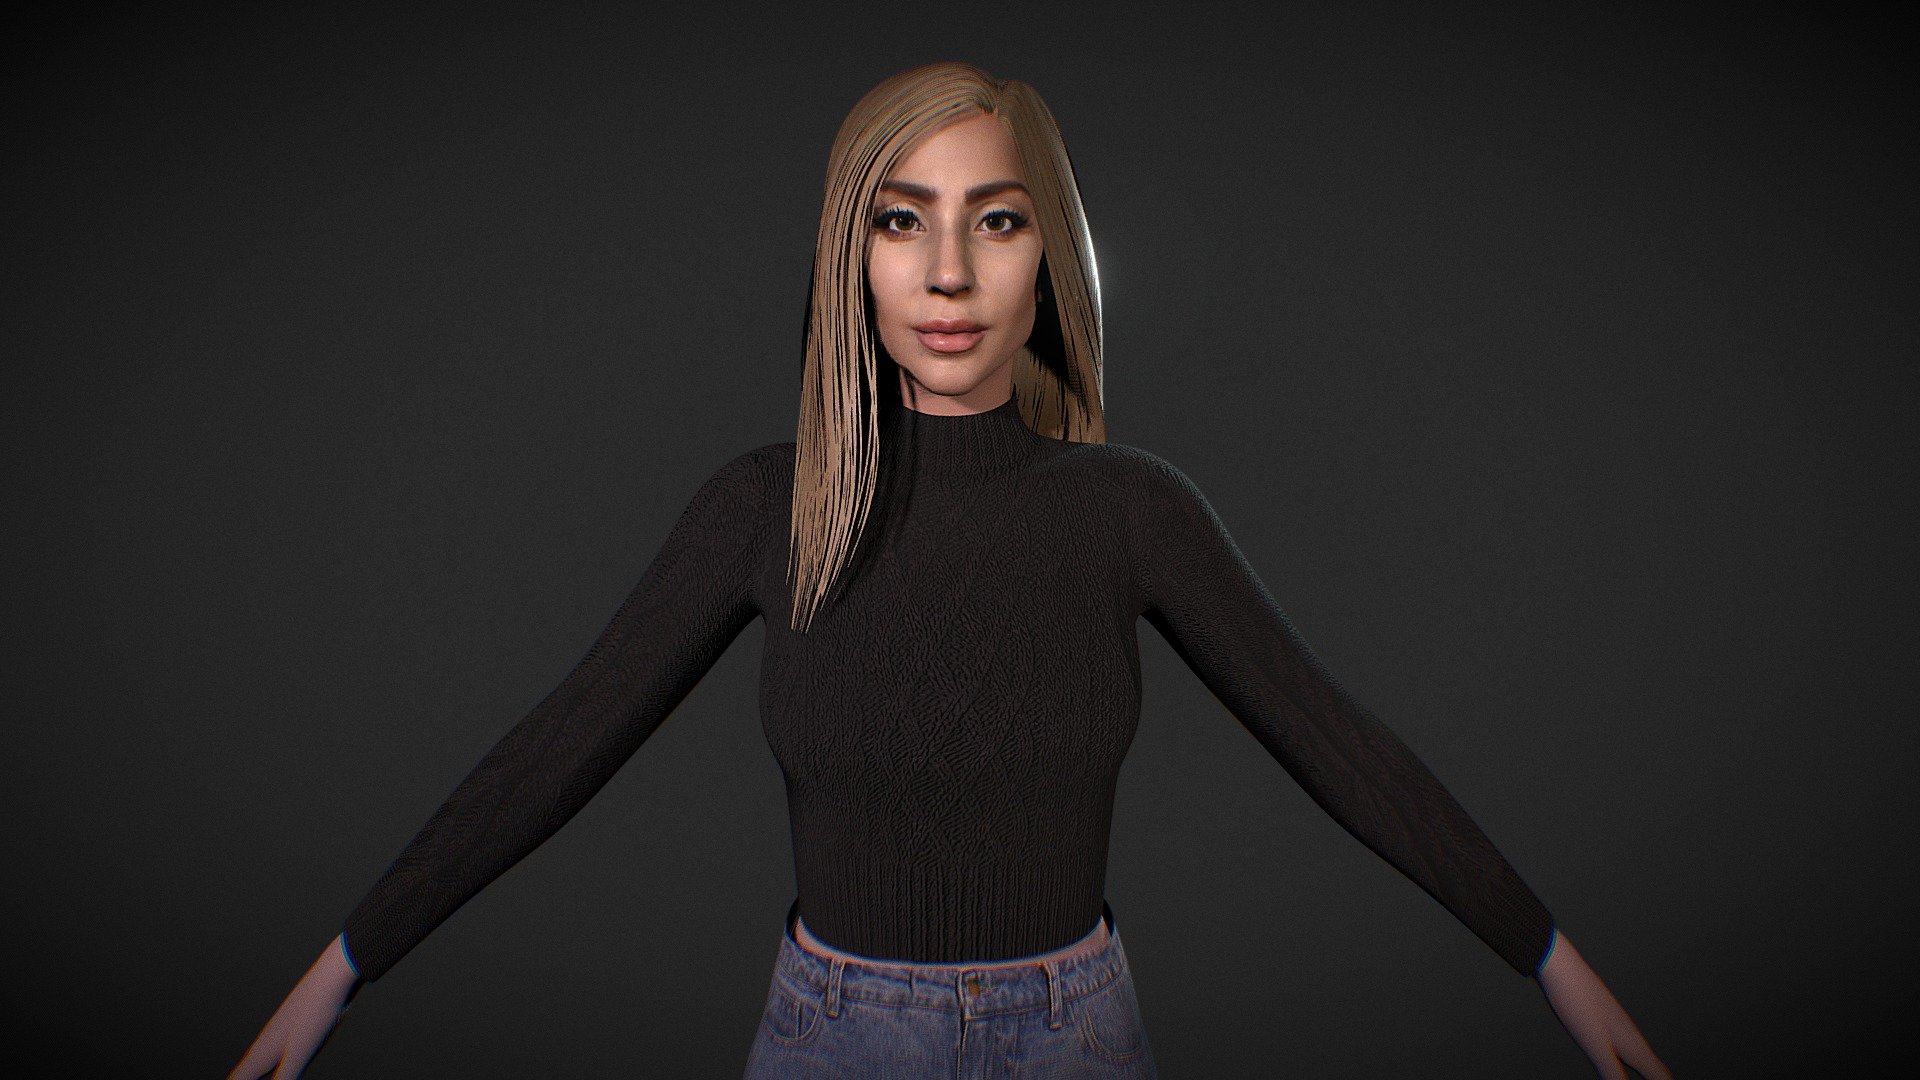 I try my best to replicate Lady Gaga on Blender. I hope you guys like it!
This model is not rigged.
New: Updated the textures and UV mapping 3d model